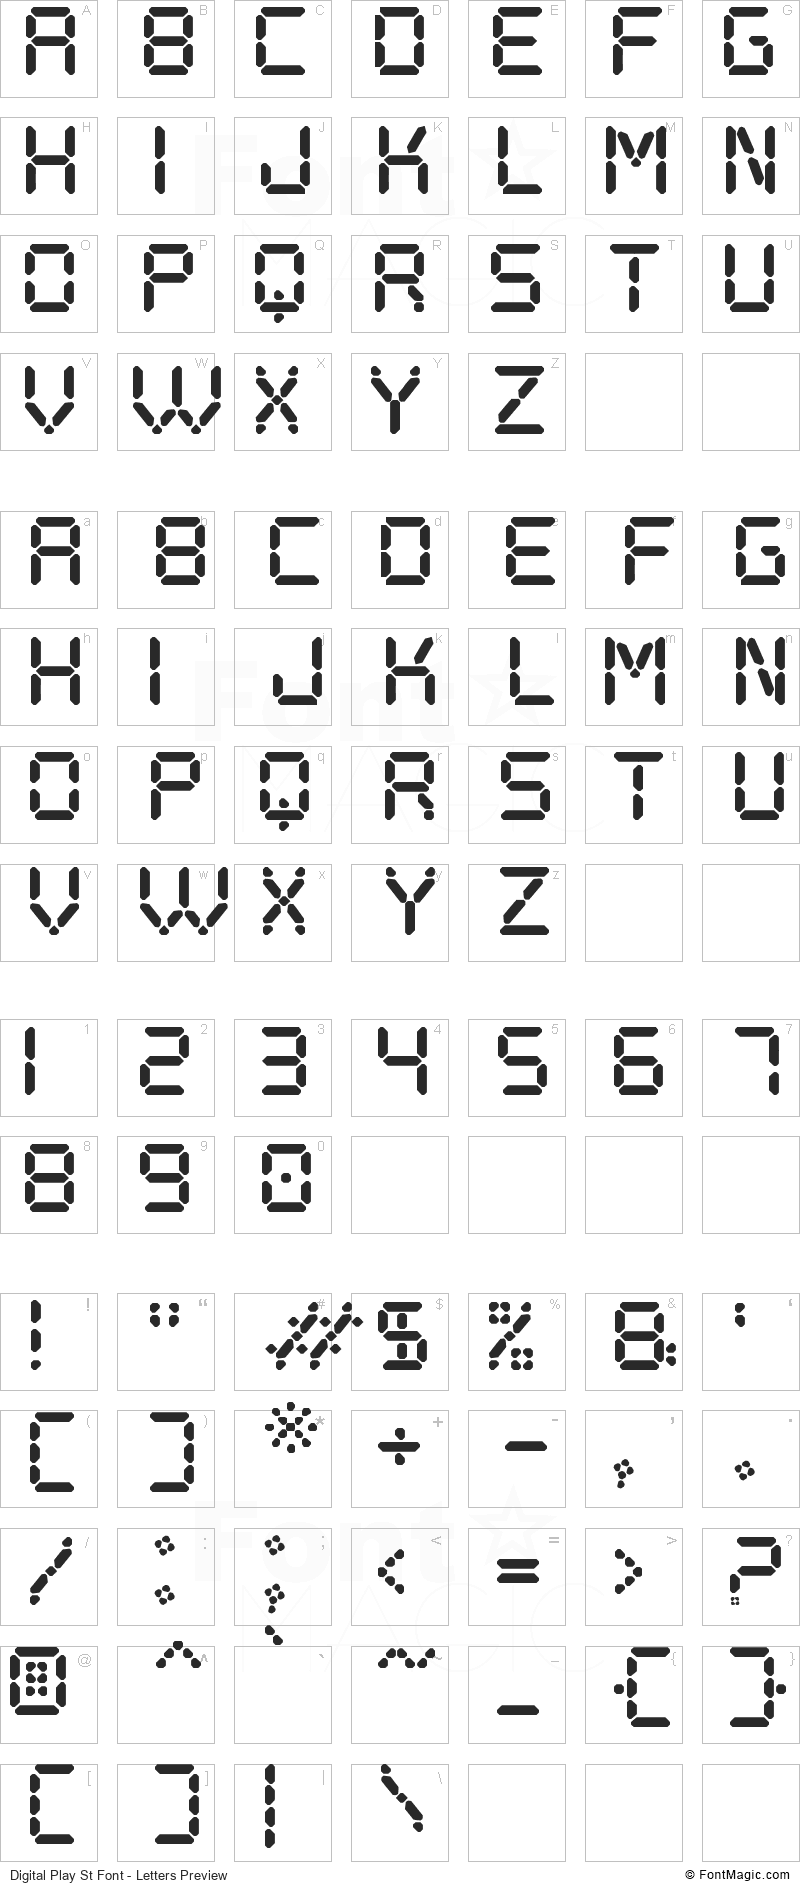 Digital Play St Font - All Latters Preview Chart